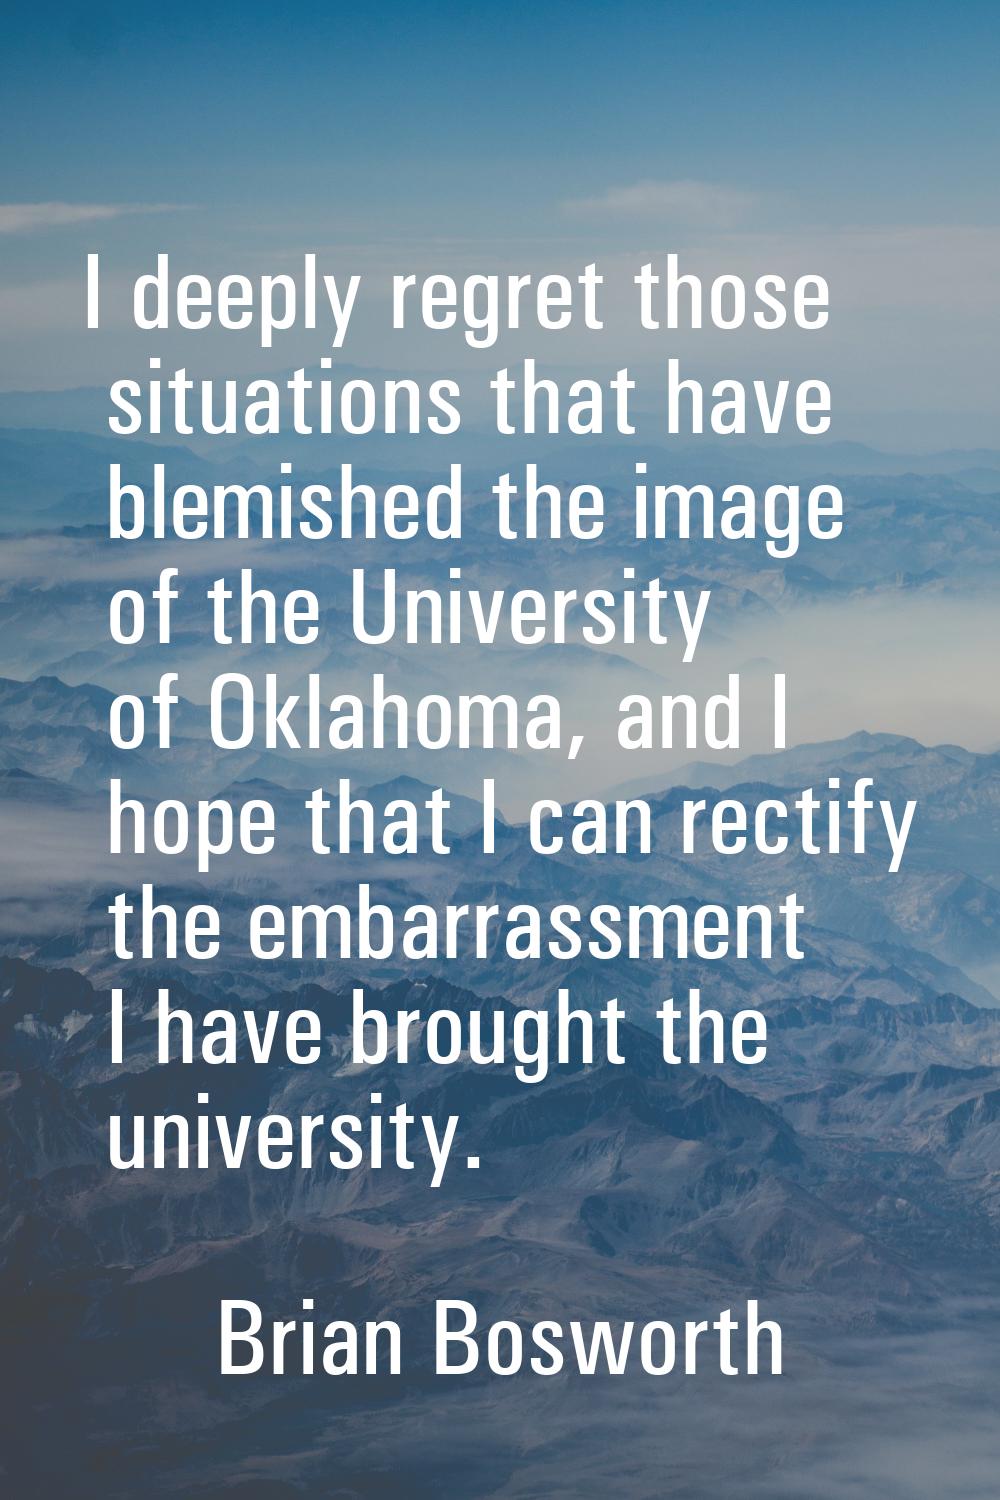 I deeply regret those situations that have blemished the image of the University of Oklahoma, and I